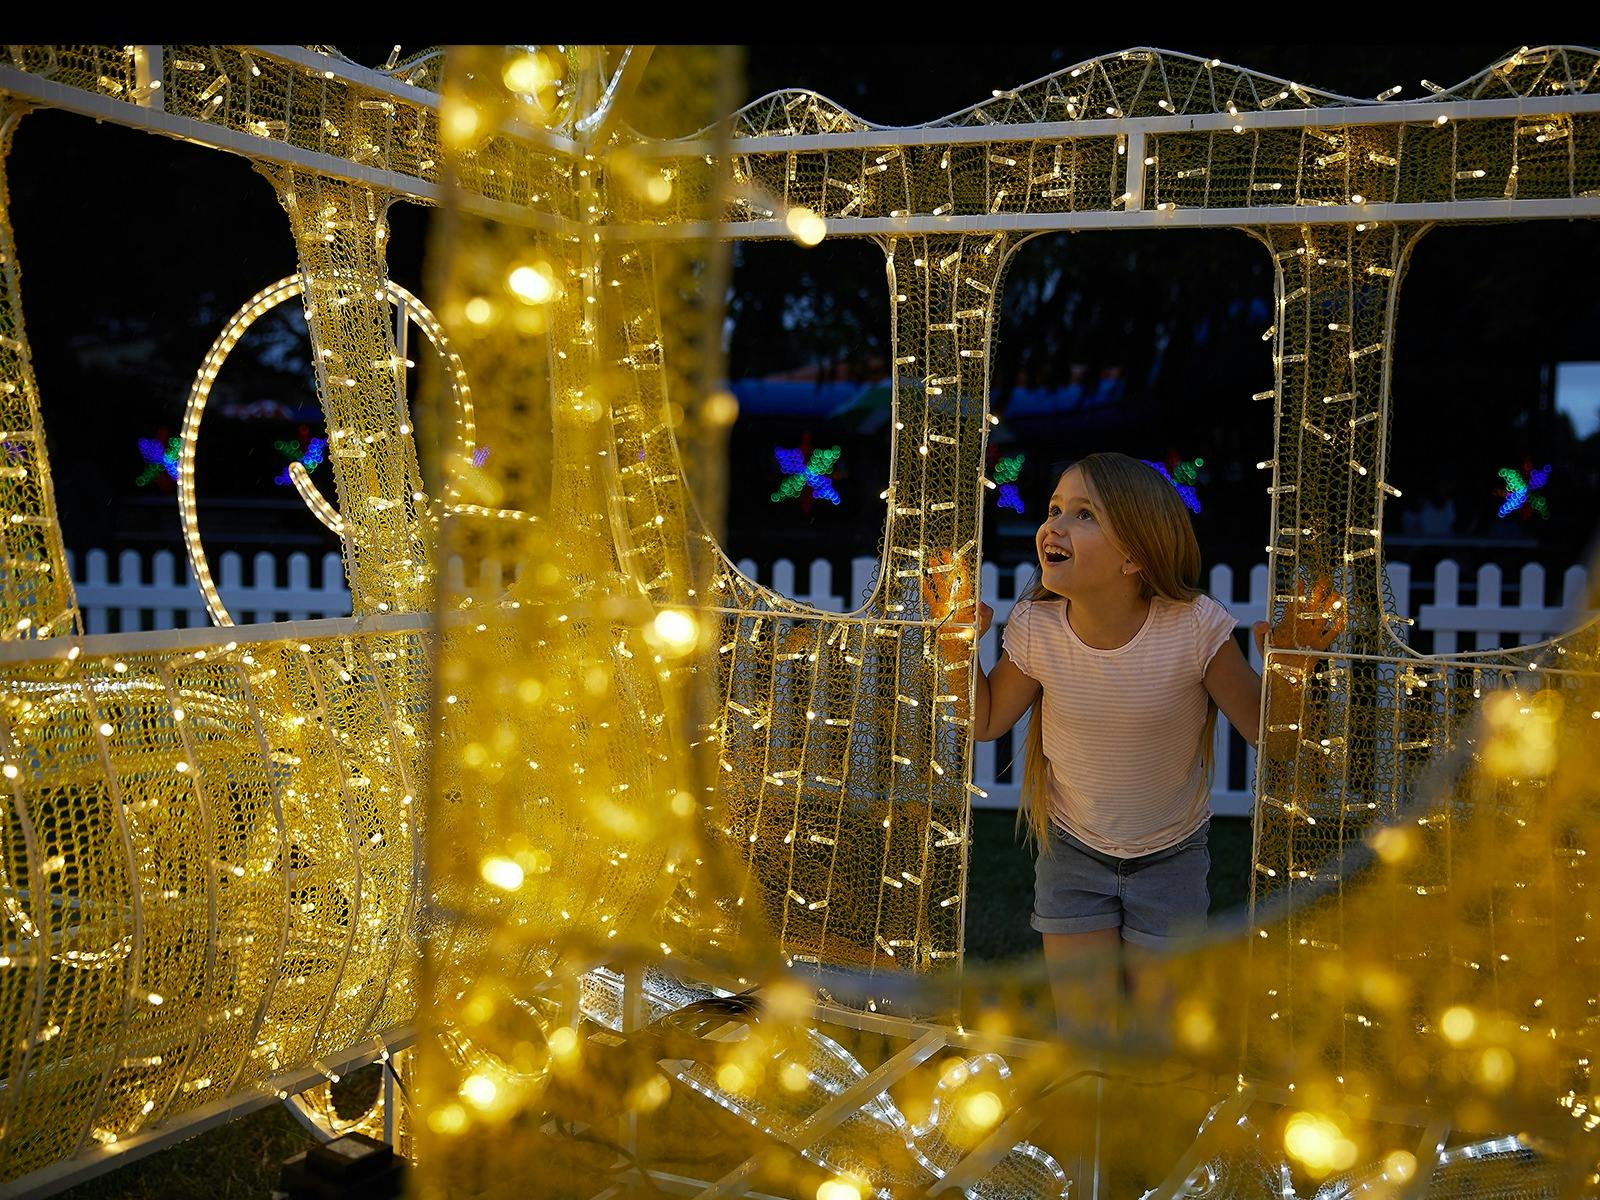 A child looks inside a lit-up house frame at Adventure Park Christmas Festival of Lights.